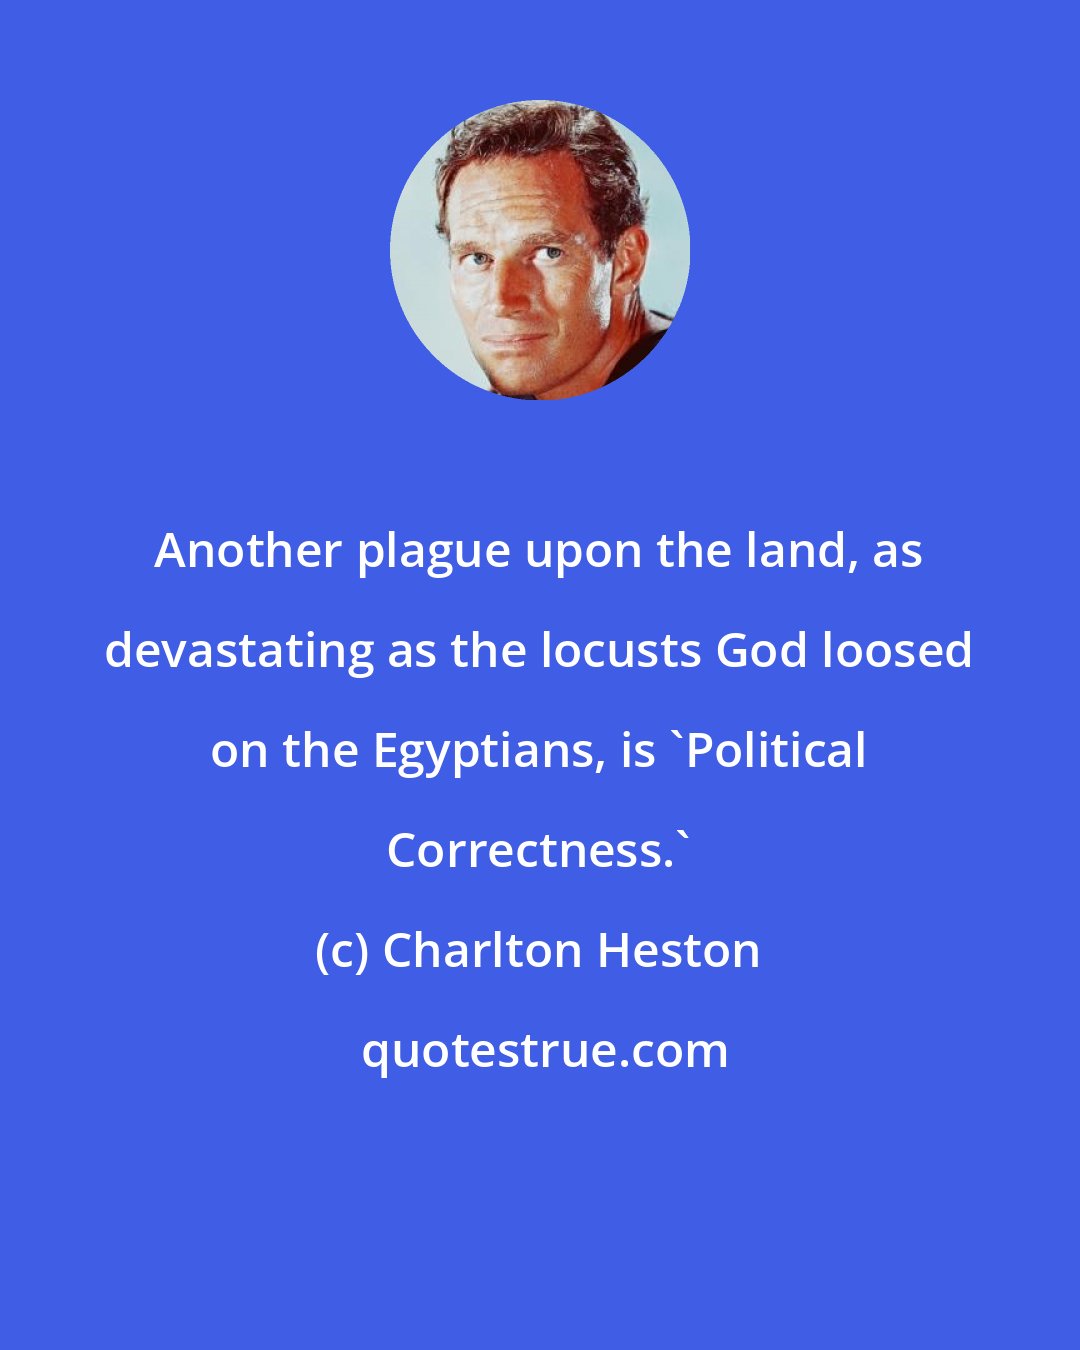 Charlton Heston: Another plague upon the land, as devastating as the locusts God loosed on the Egyptians, is 'Political Correctness.'